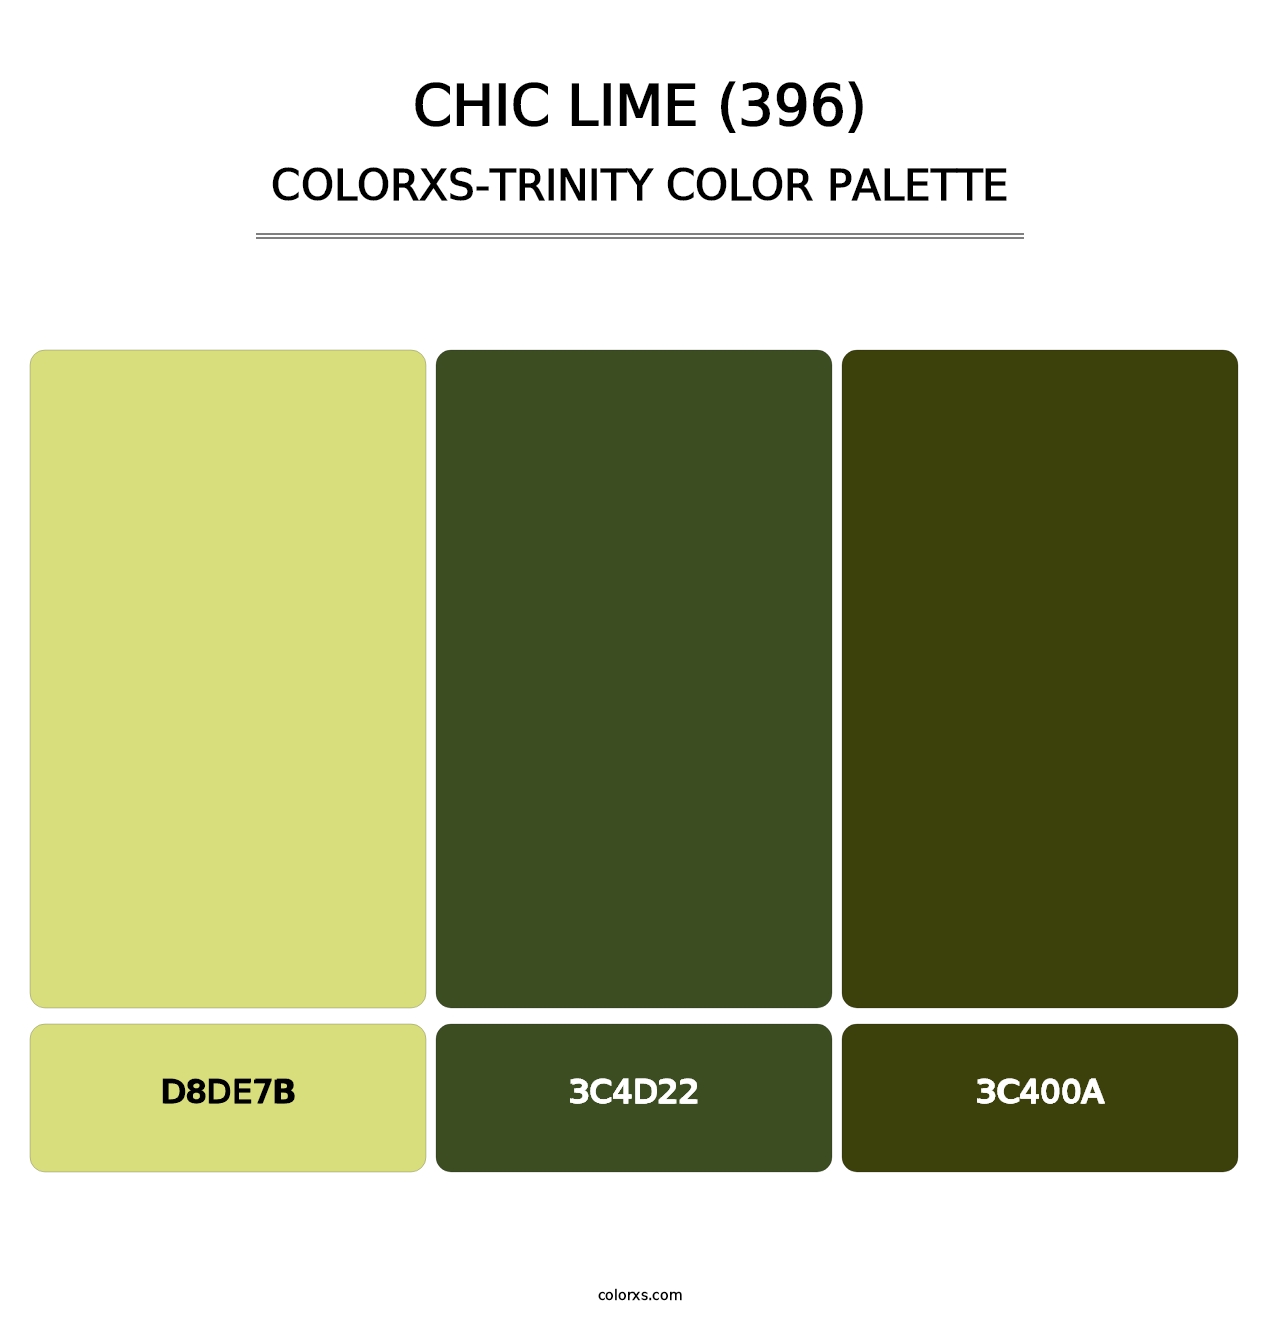 Chic Lime (396) - Colorxs Trinity Palette